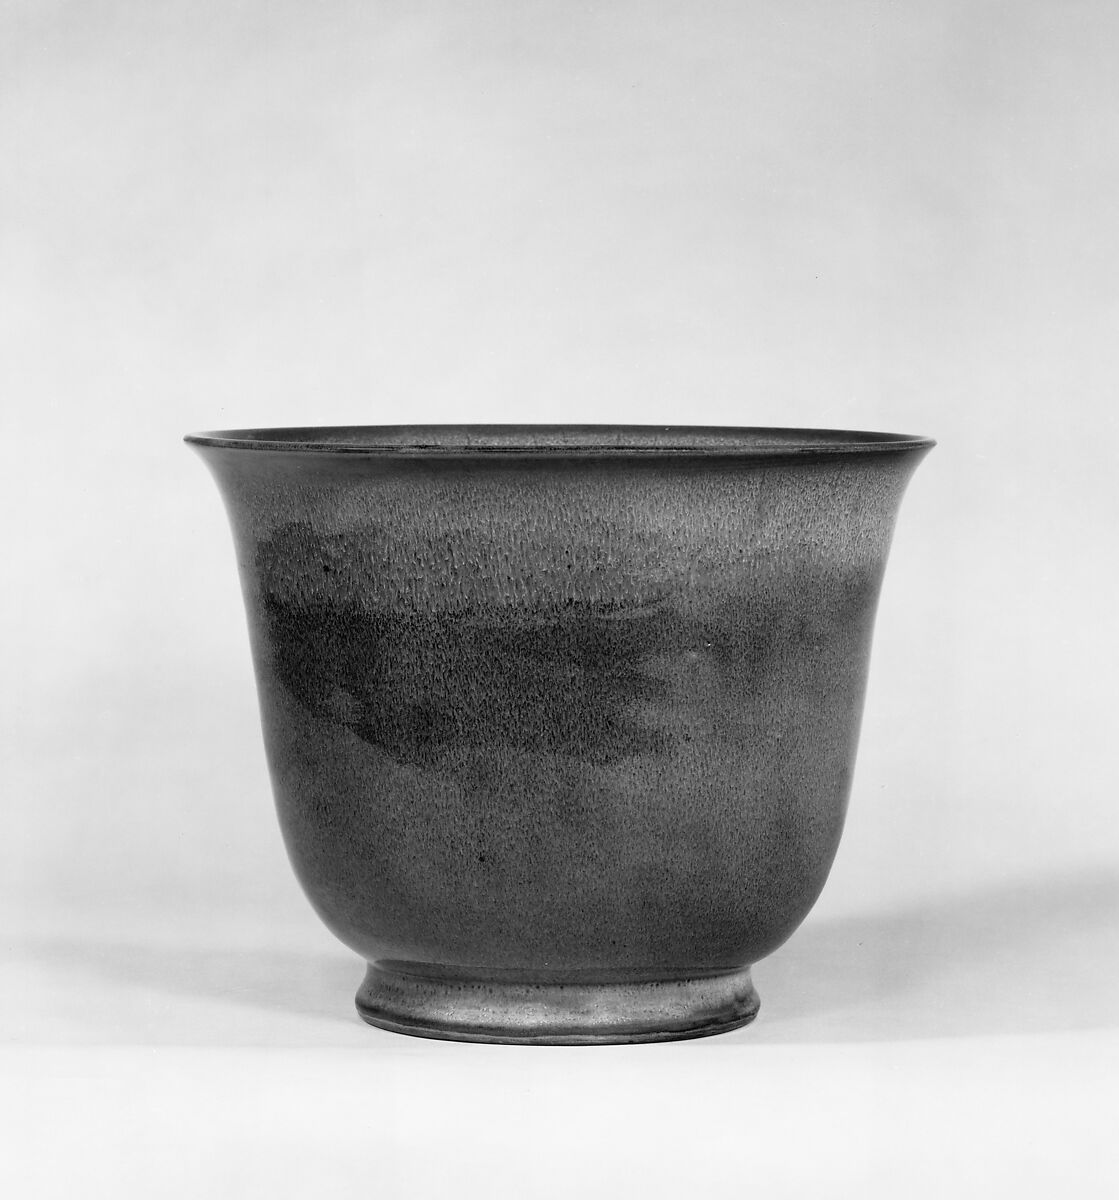 Flower Pot, Stoneware with blue glaze ( "numbered Jun" ware), China 